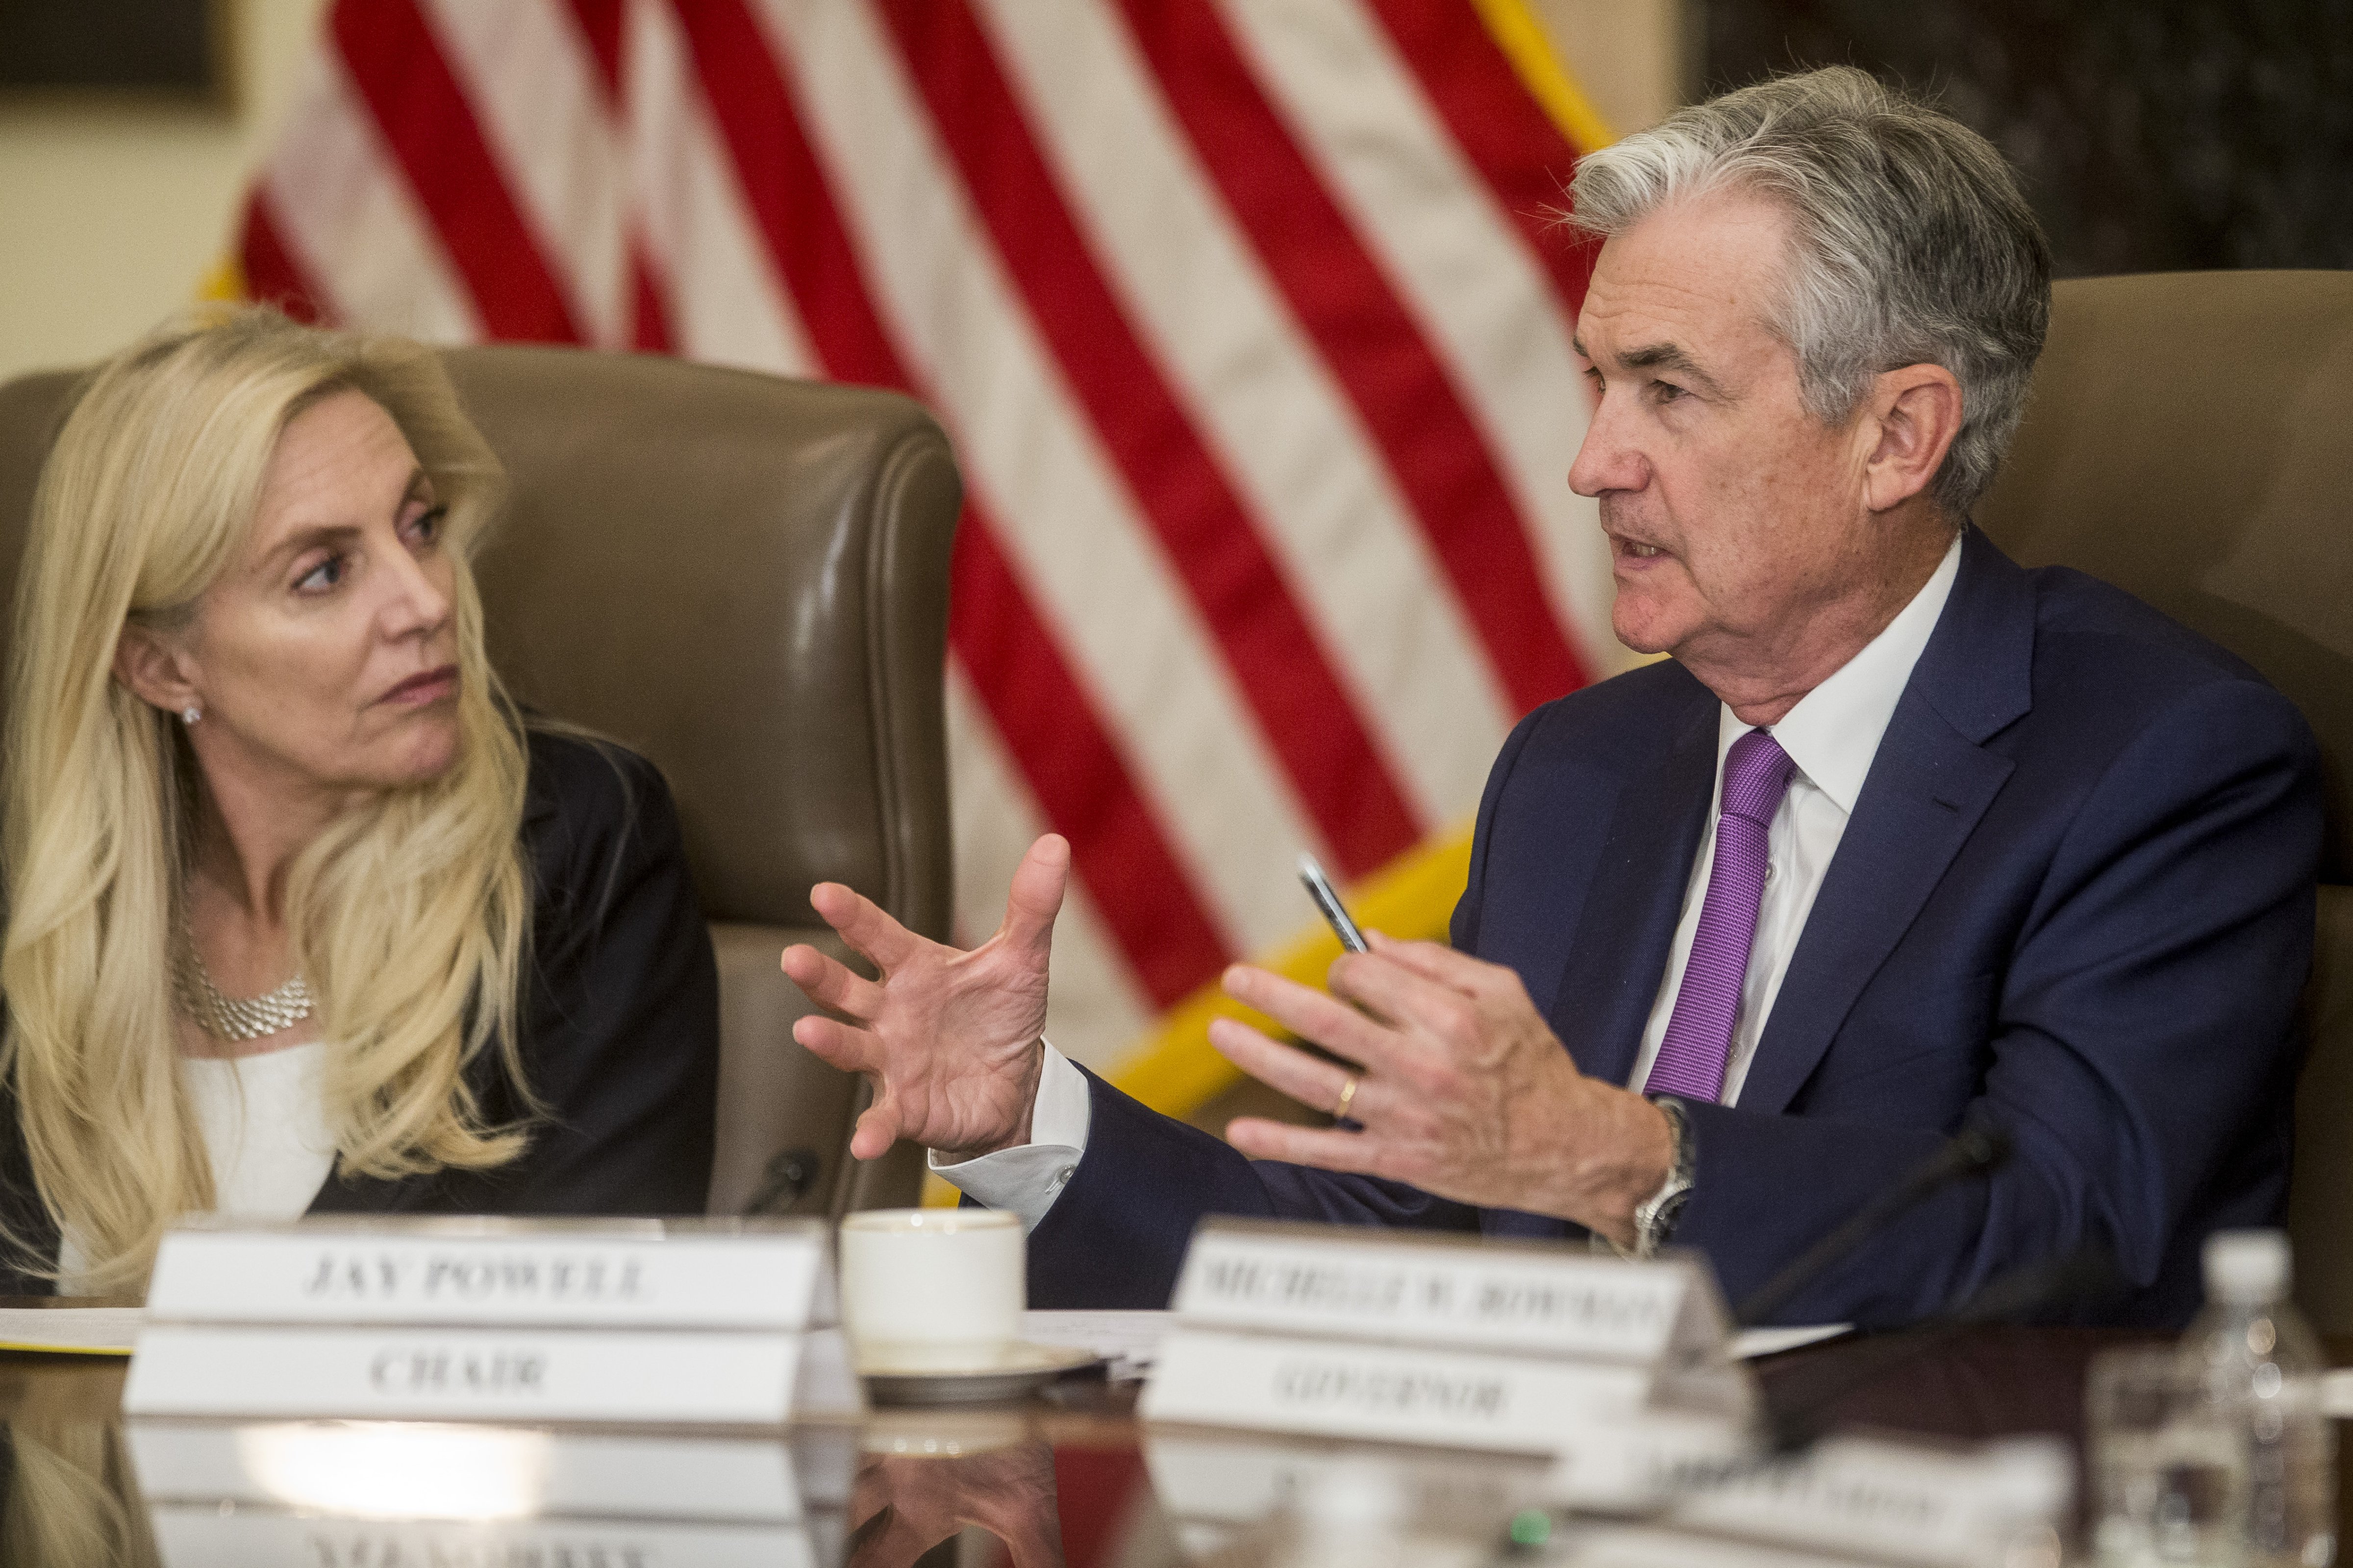 Jerome Powell, chairman of the U.S. Federal Reserve, and Lael Brainard, governor of the U.S. Federal Reserve, left, in Washington, D.C., in 2019. (Bloomberg via Getty Images;© 2019)